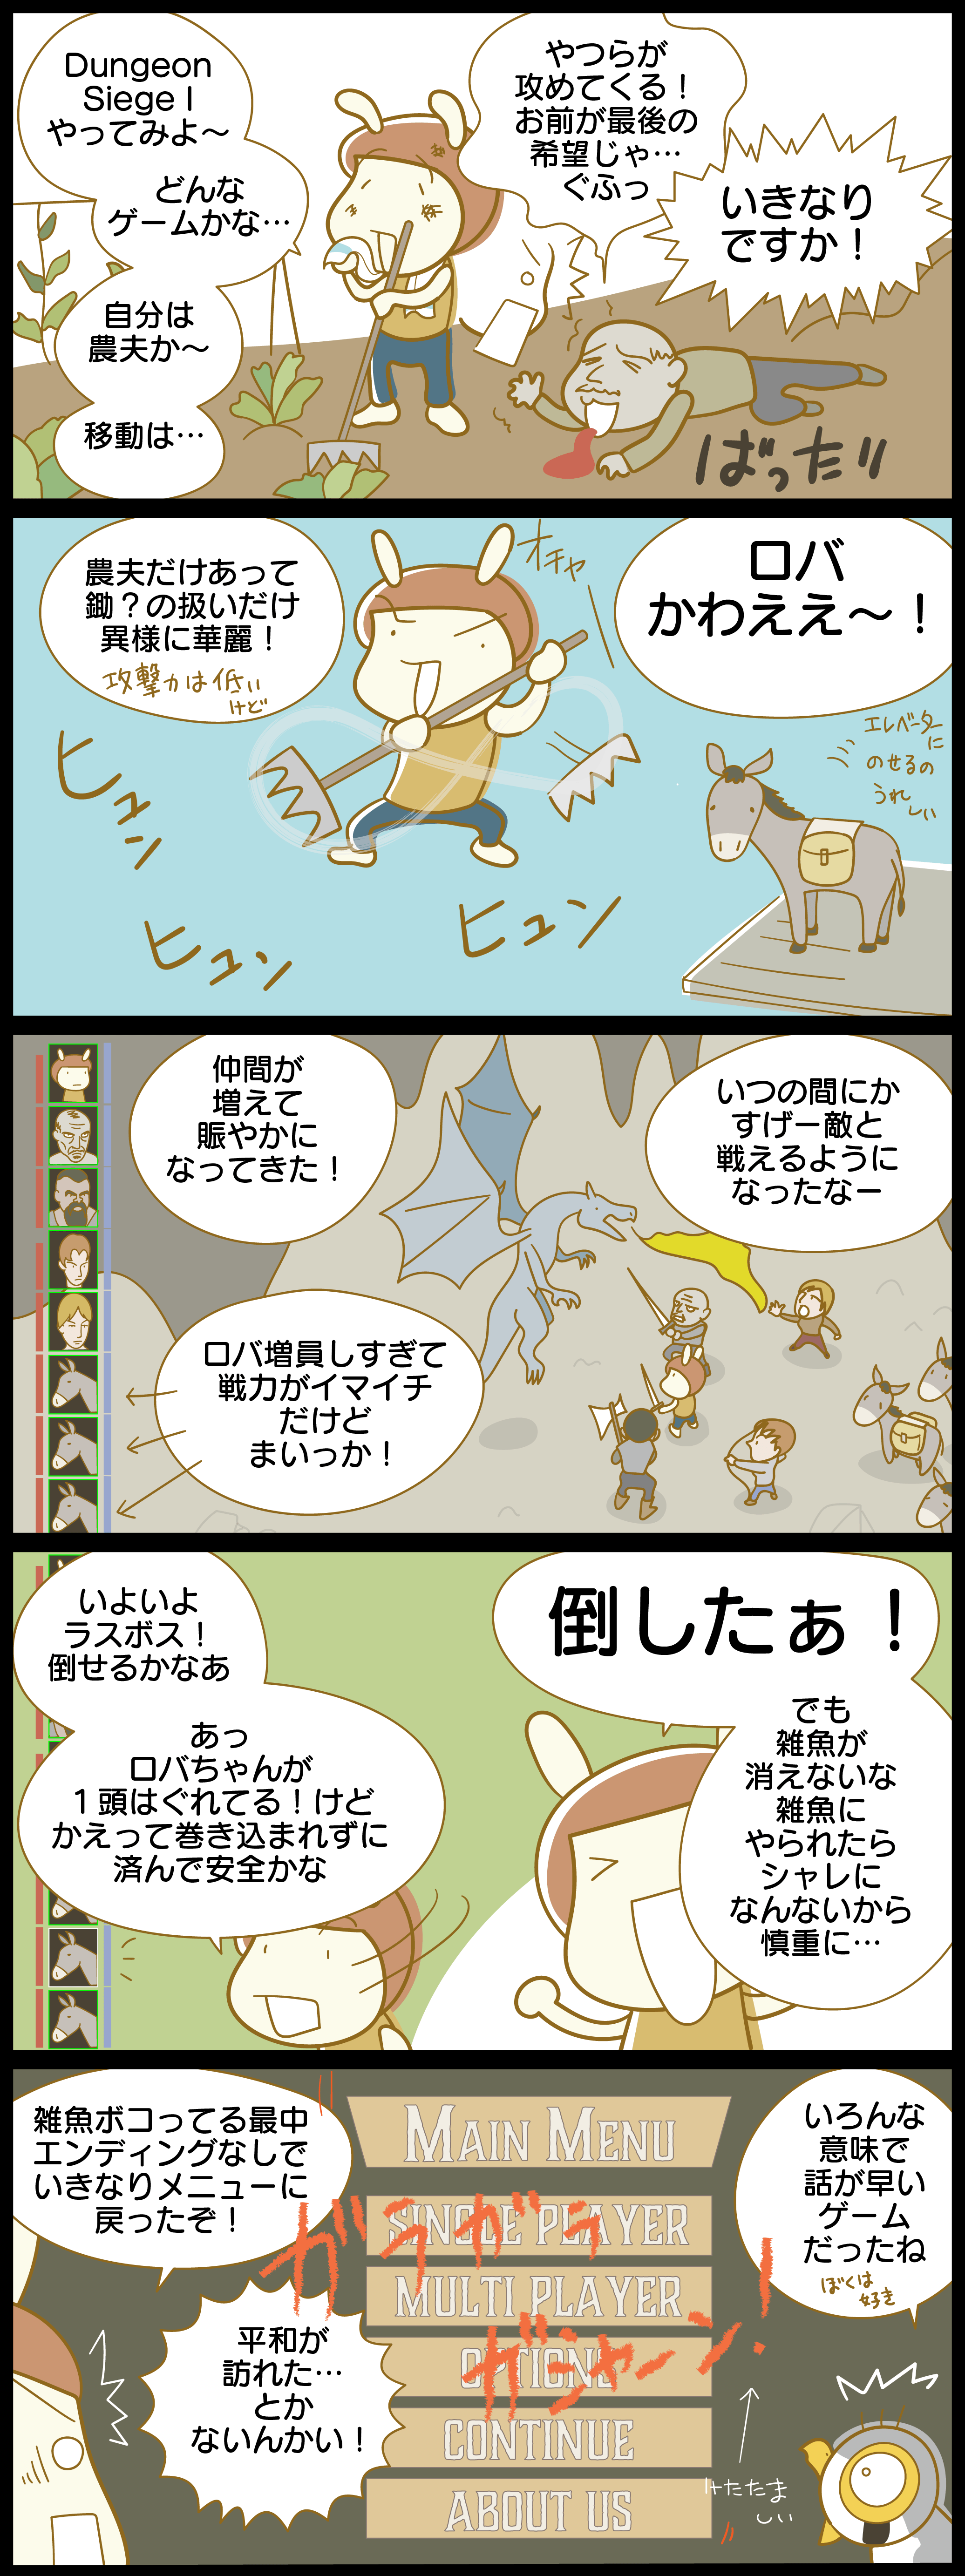 Dungeon Siege 1・来た見た勝った！[漫画日記]